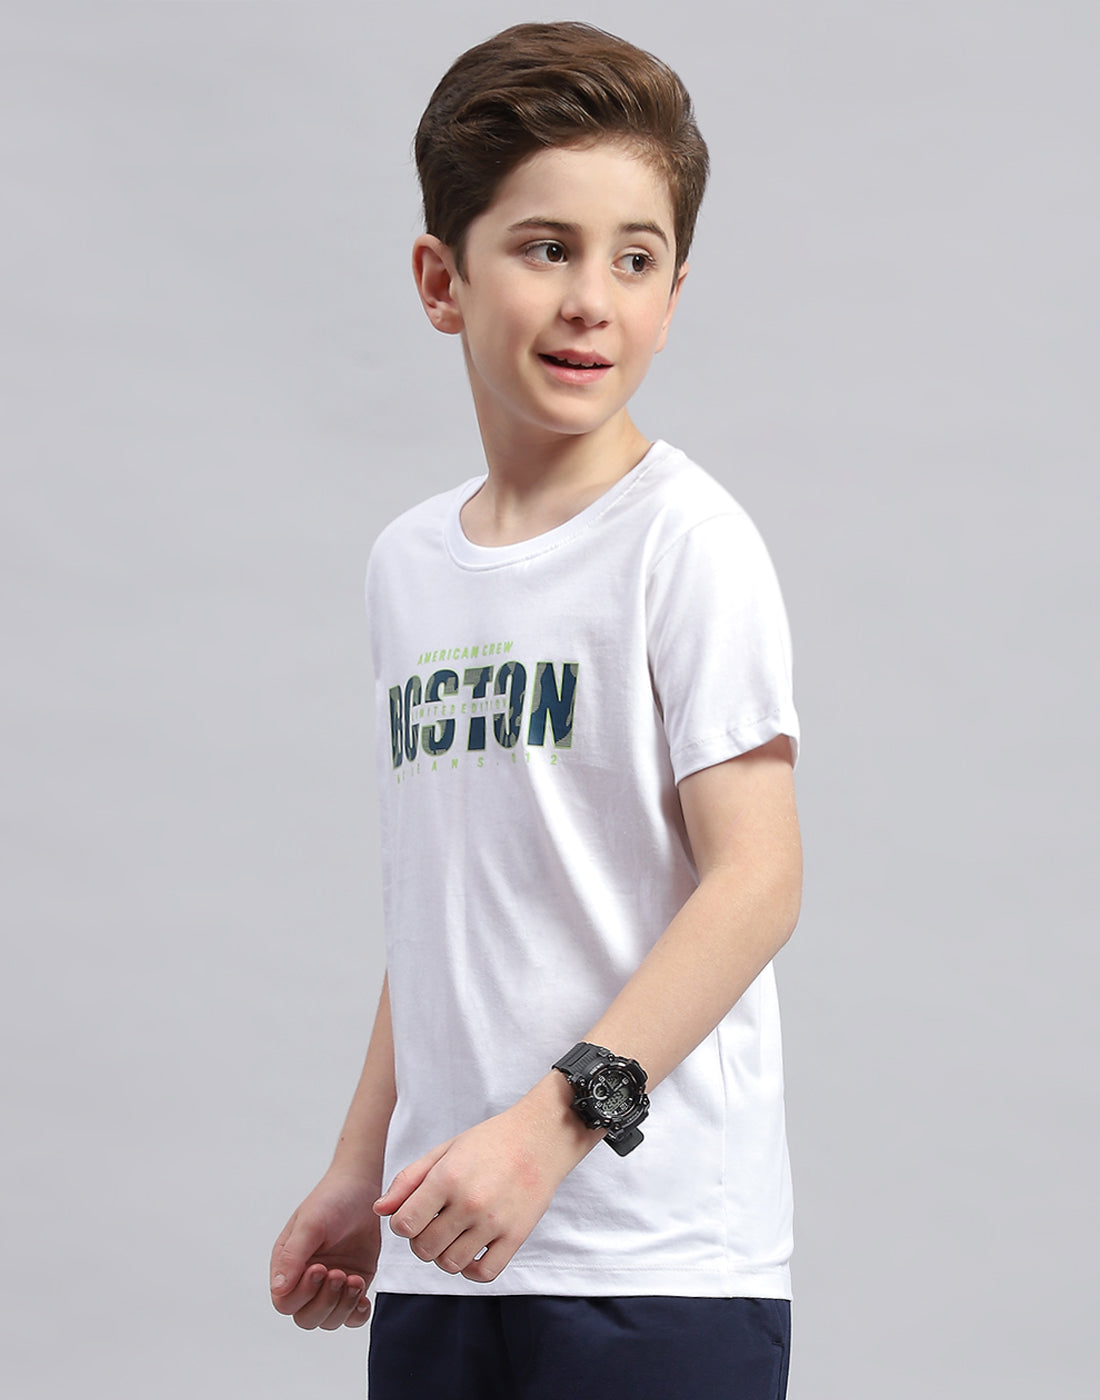 Boys Teal Blue & White Printed Round Neck Half Sleeve T-Shirt (Pack of 2)